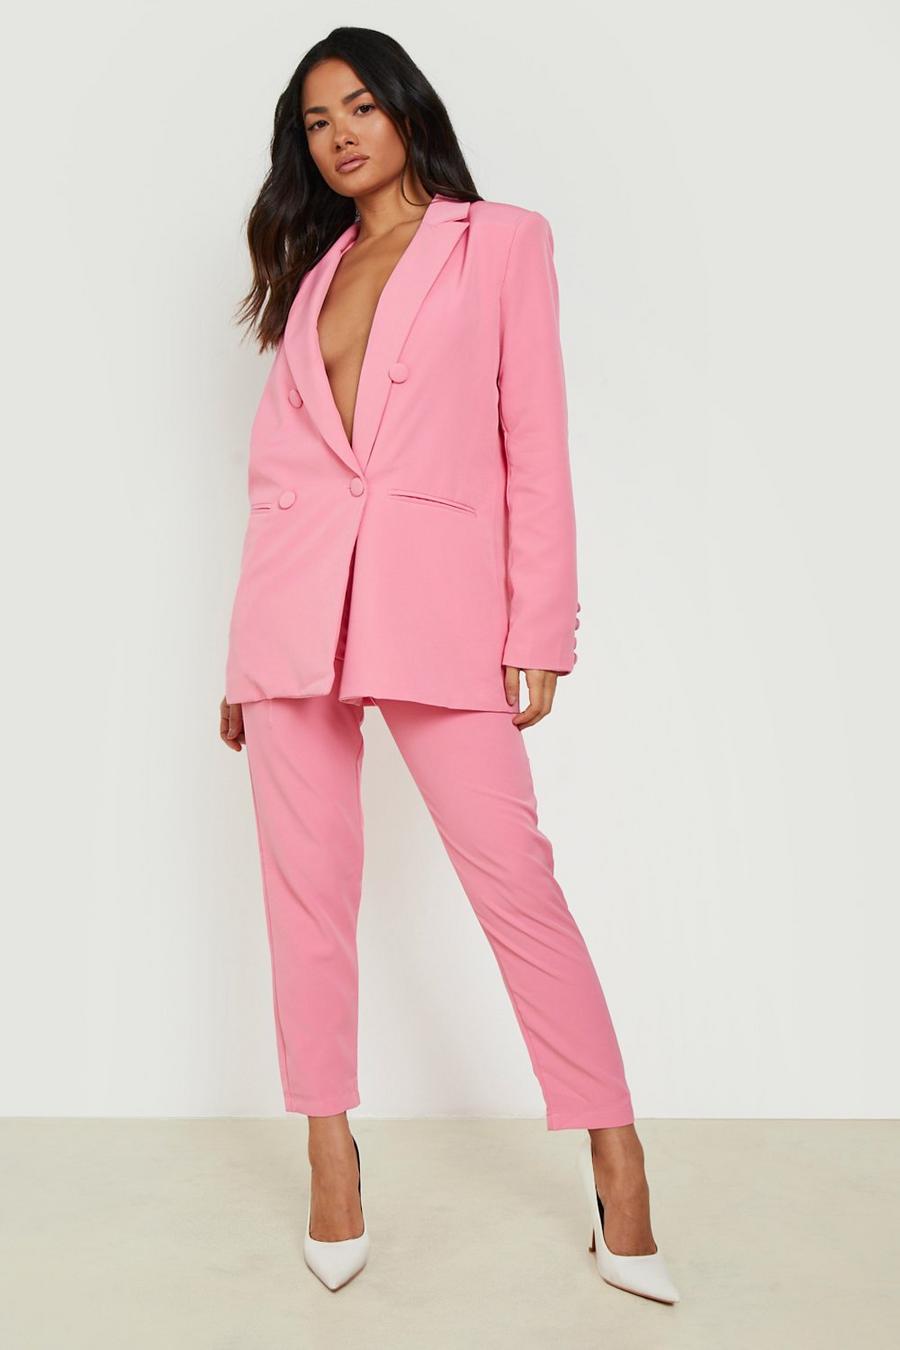 Candy pink rose Tailored Ankle Grazer Trousers